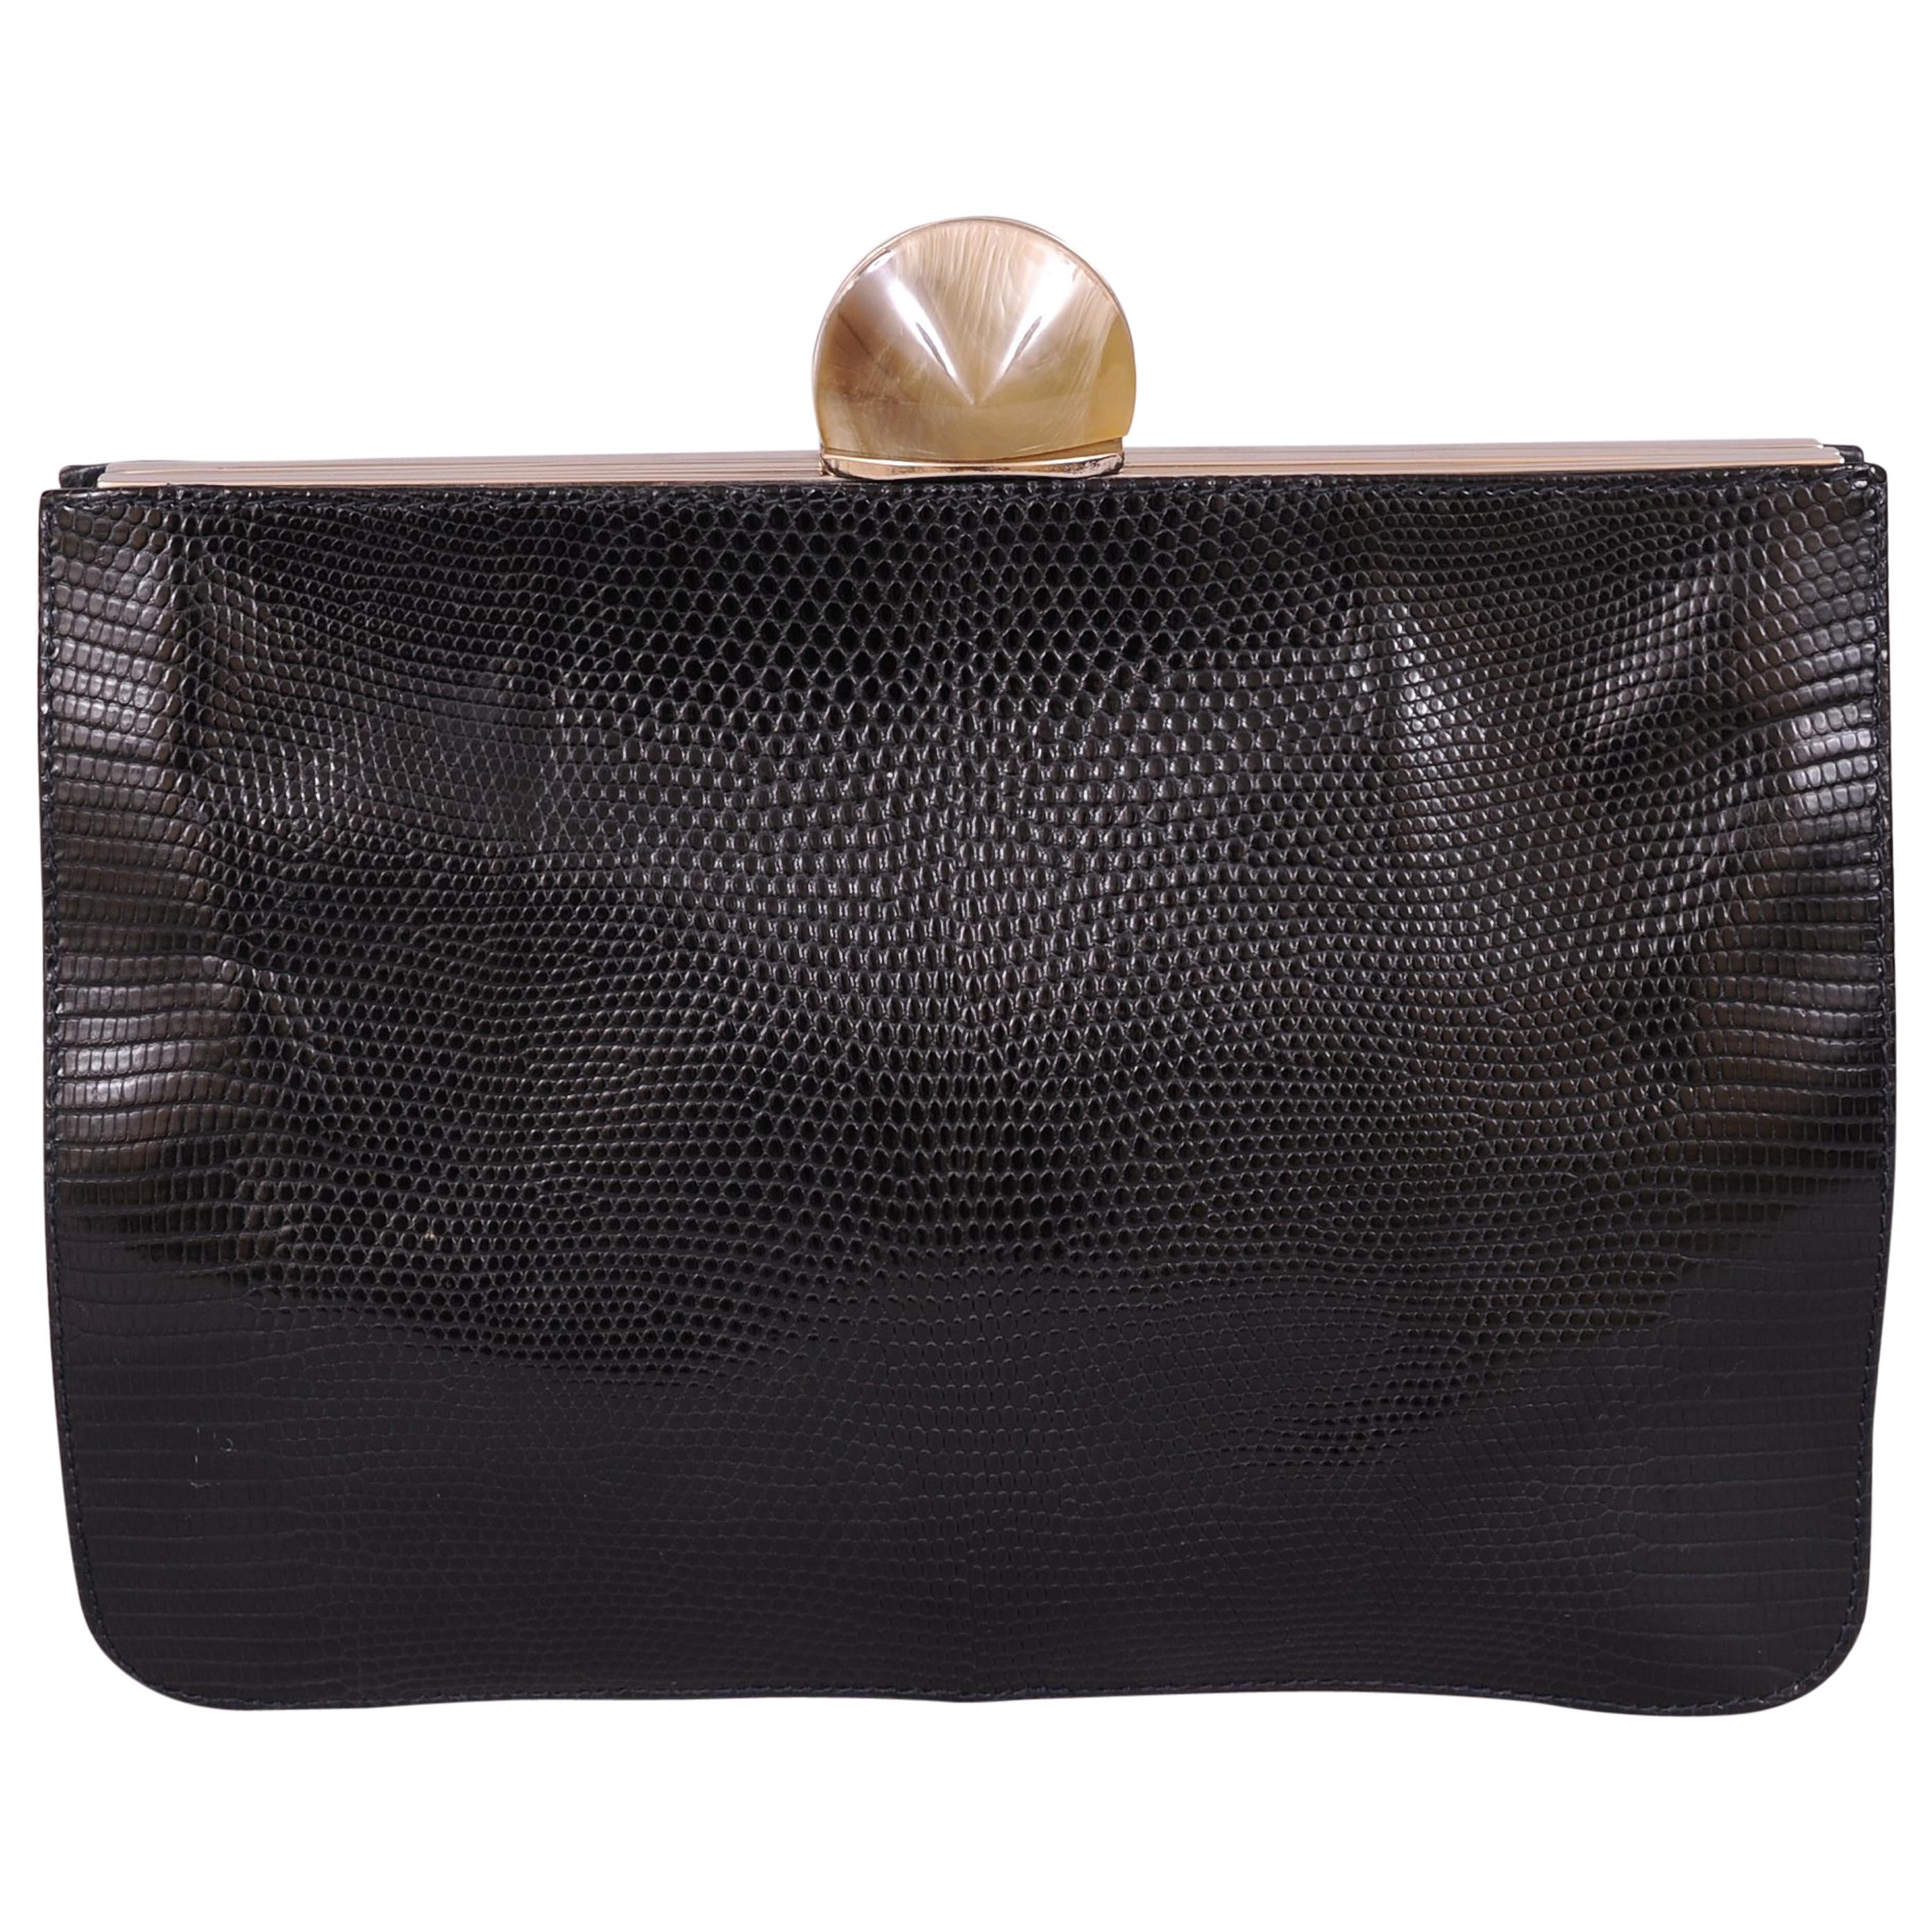 Desmo Black Lizard Clutch with Faceted Stone Clasp